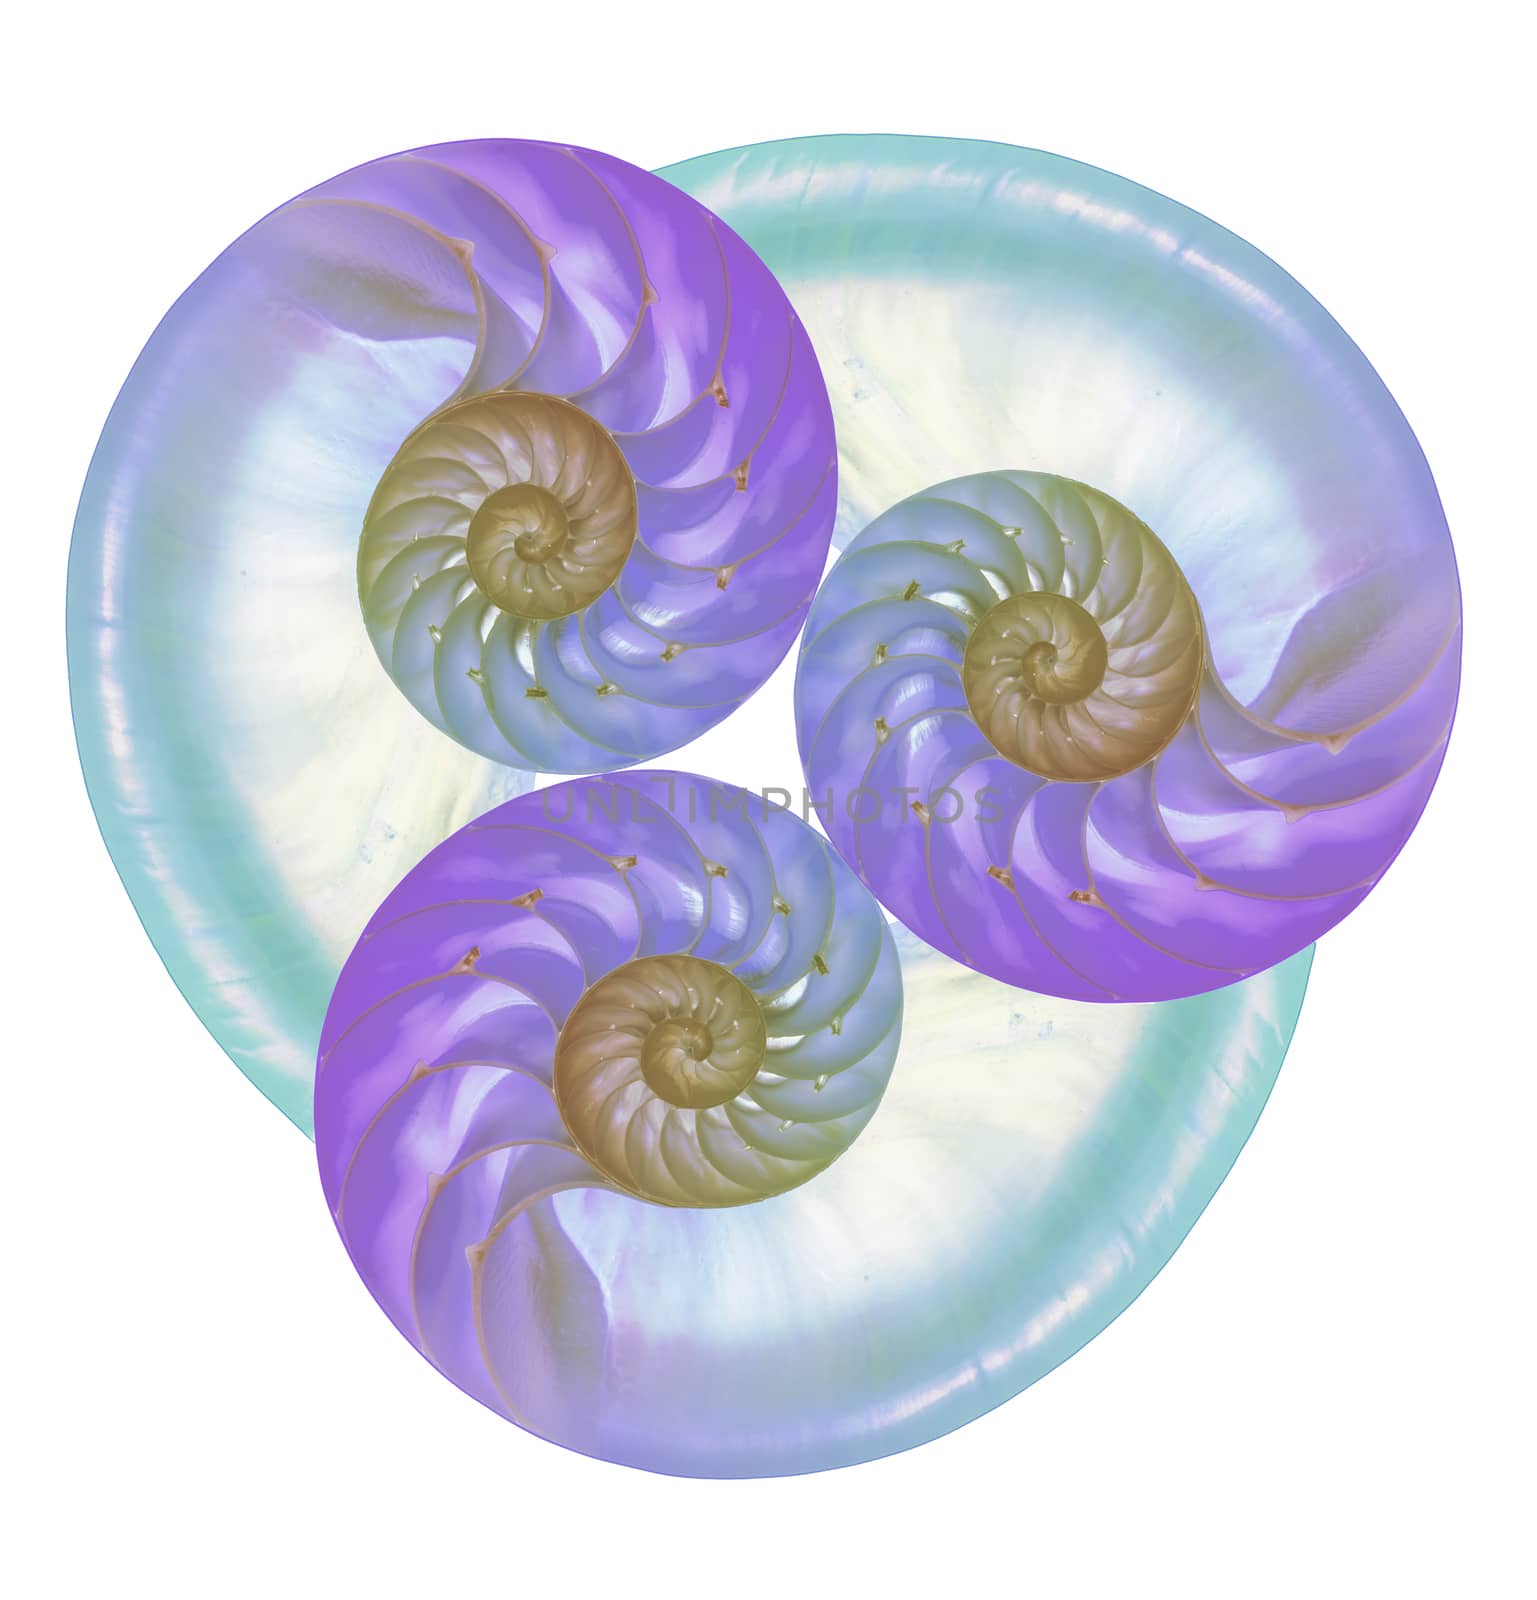 Three colored nautilus shells combined into art by fyletto